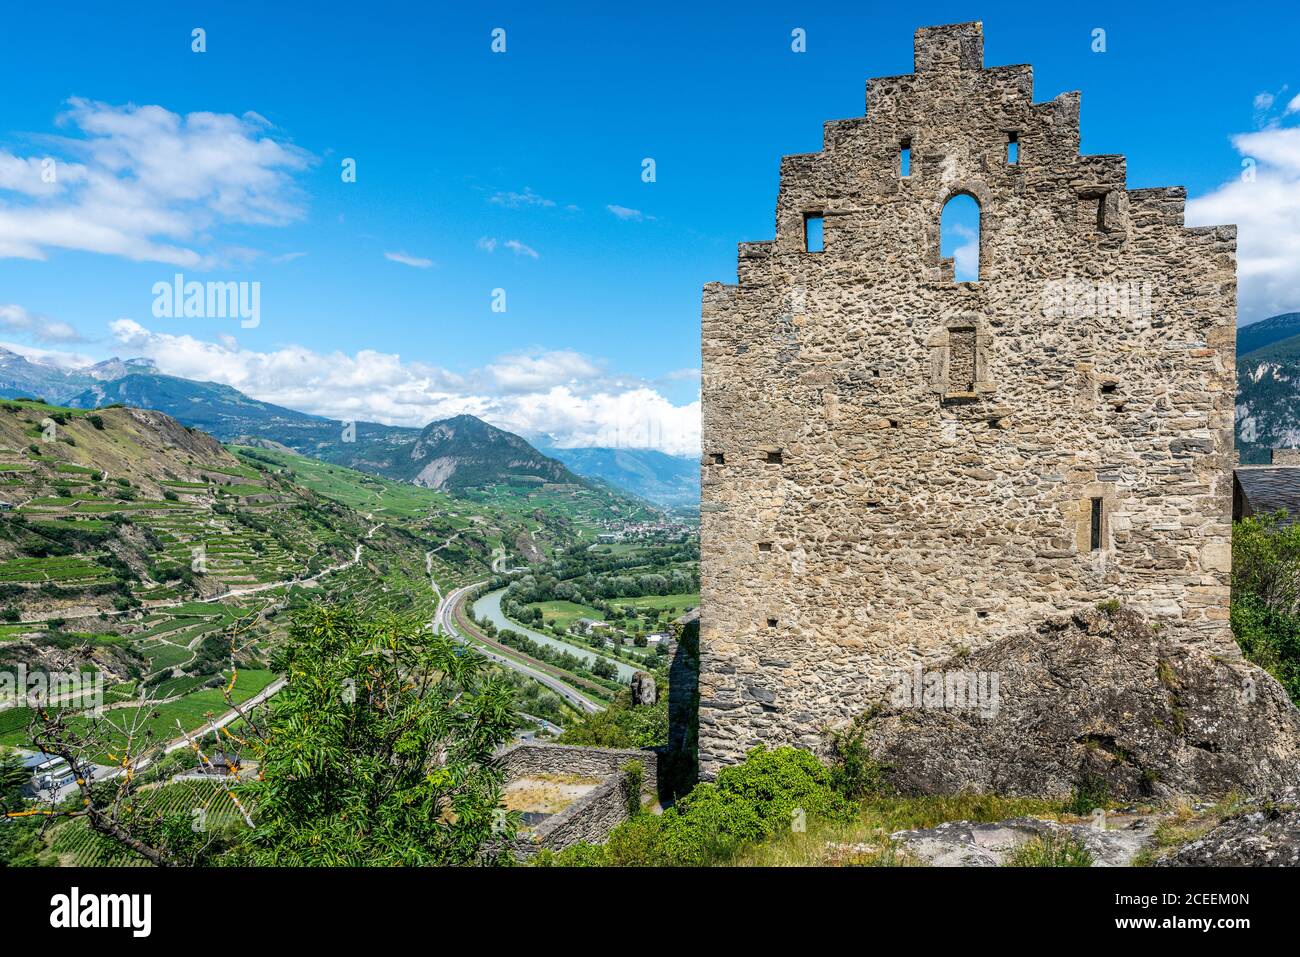 Panorama of the ruins of Tourbillon castle and aerial view of Valais canton with Rhone river and mountains in Sion Switzerland Stock Photo